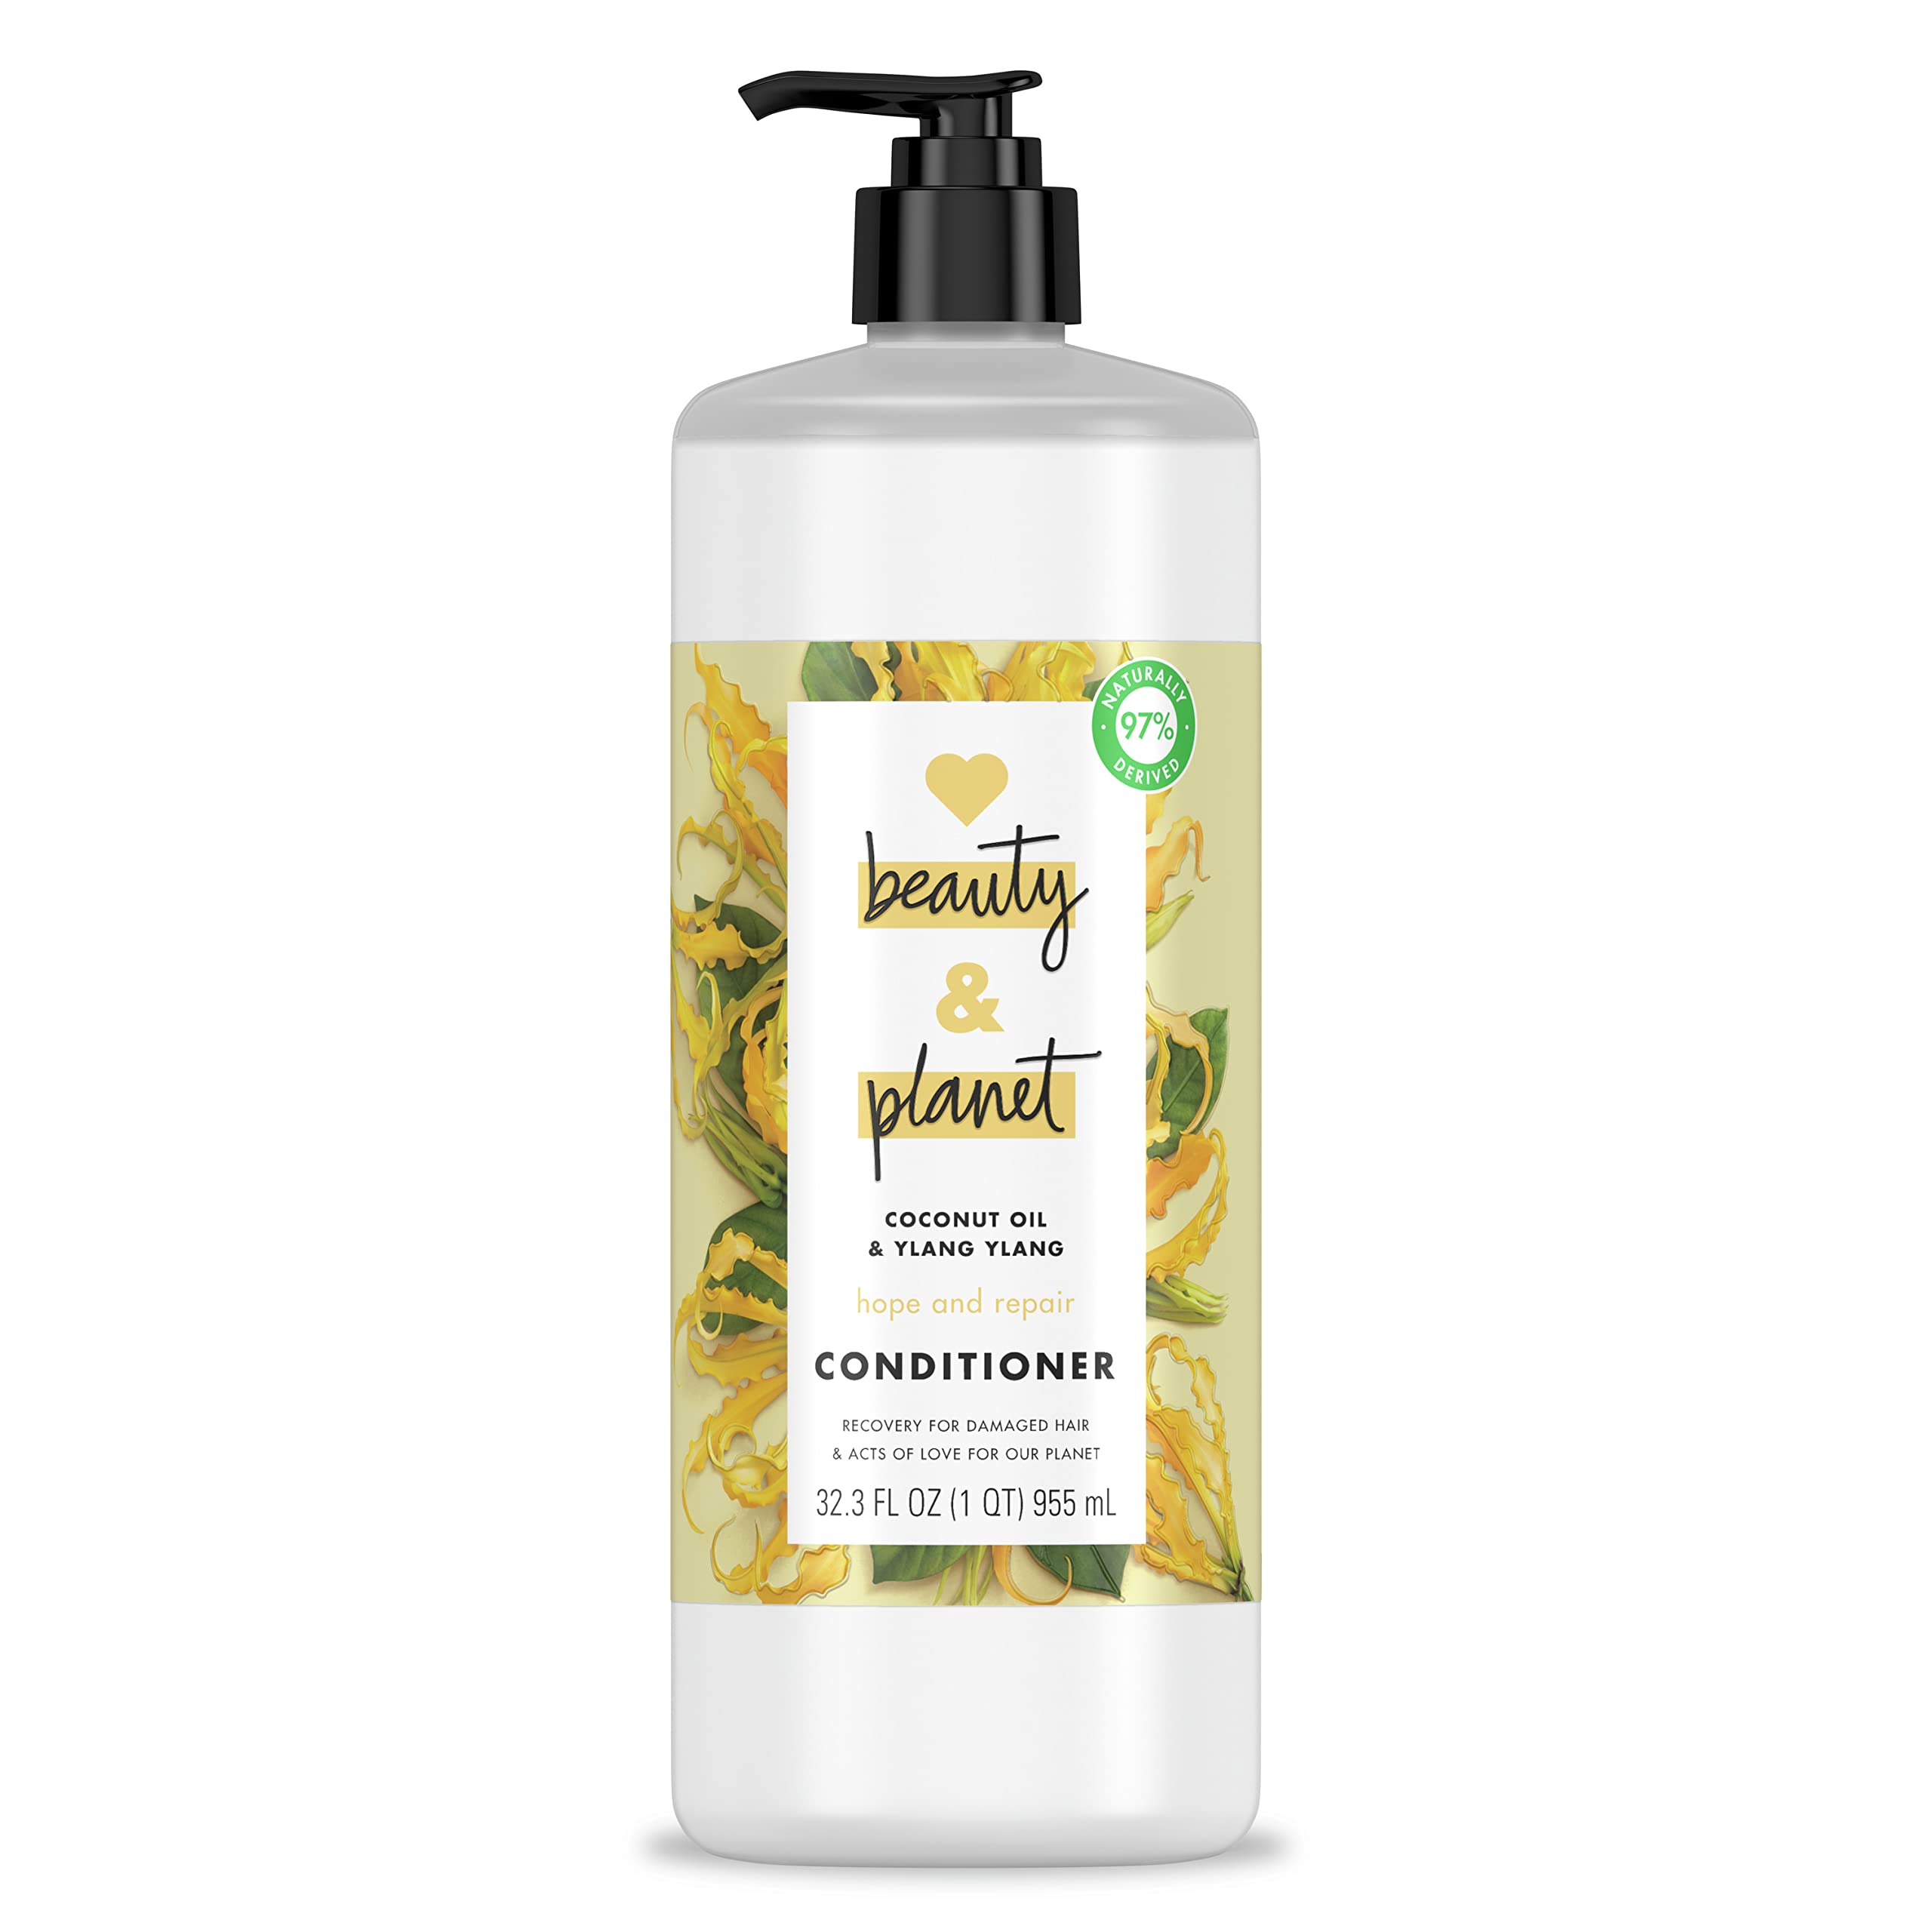 Love Beauty and Planet Hope and Hair Repair Conditioner Coconut Oil & Ylang Ylang for Dry Hair and Split Ends Vegan Damaged Hair Treatment 32.3 oz